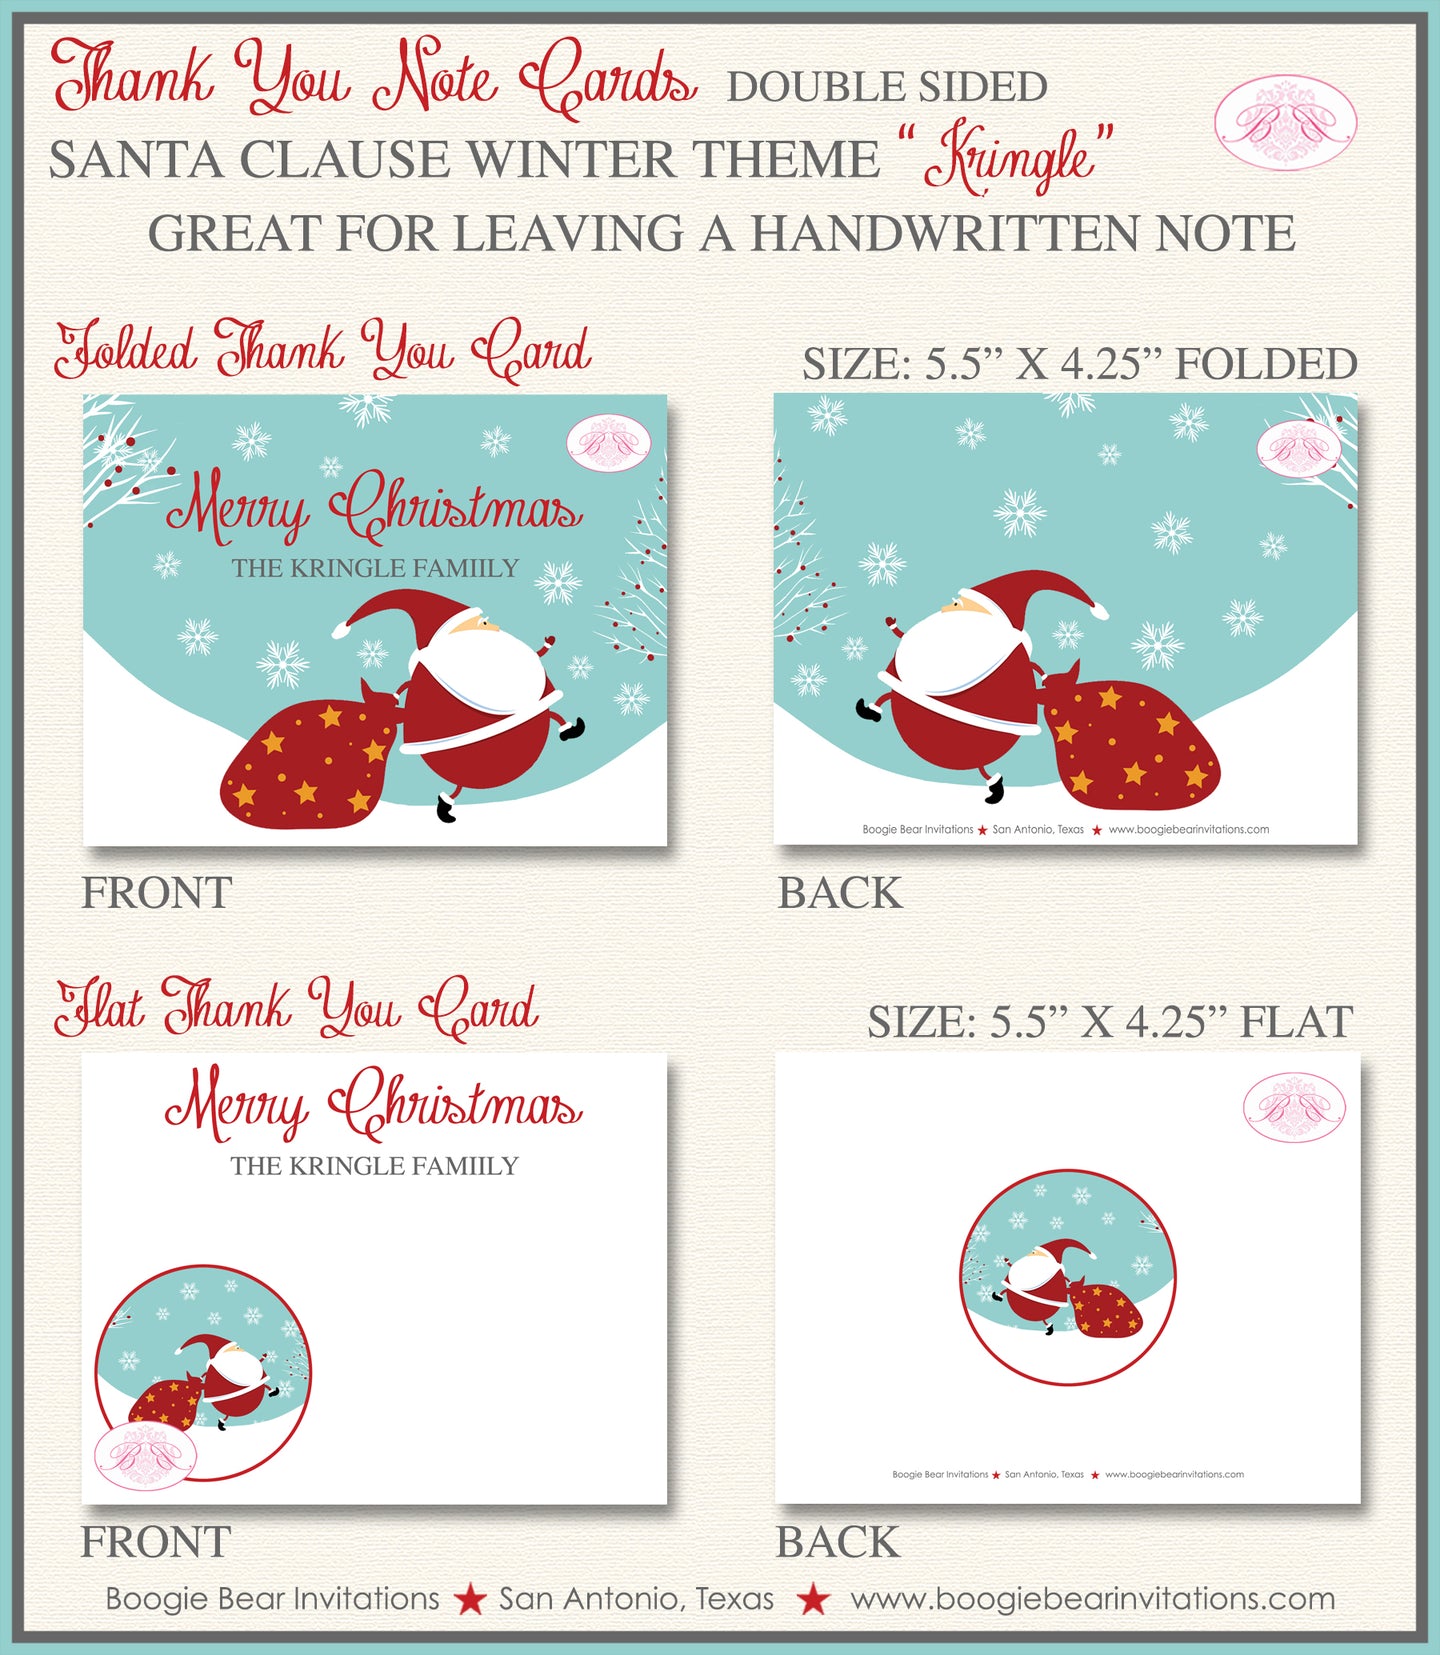 Santa Claus Christmas Party Thank You Cards Holiday Red Cookie Exchange Snowflake Boogie Bear Invitations Kringle Theme Printed Envelopes